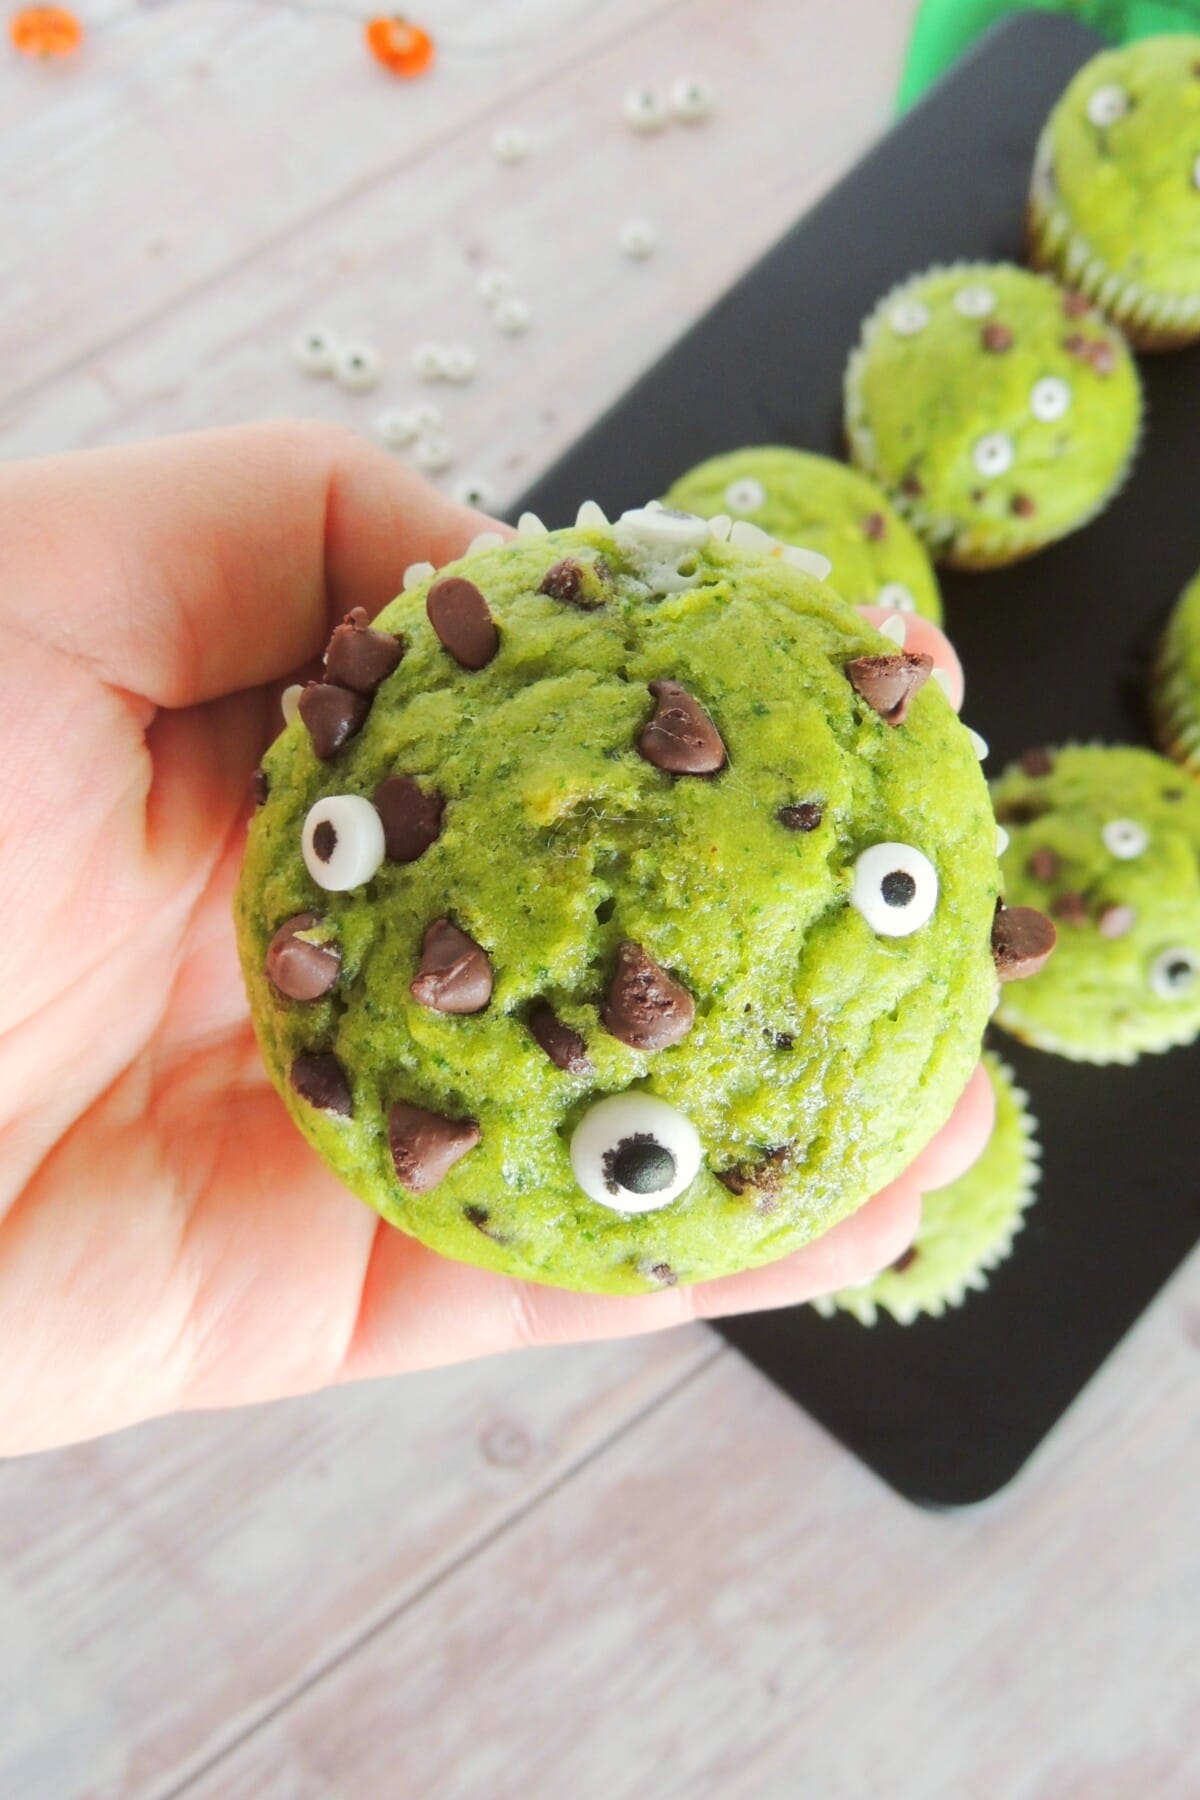 Spinach monster muffin in someone's hand